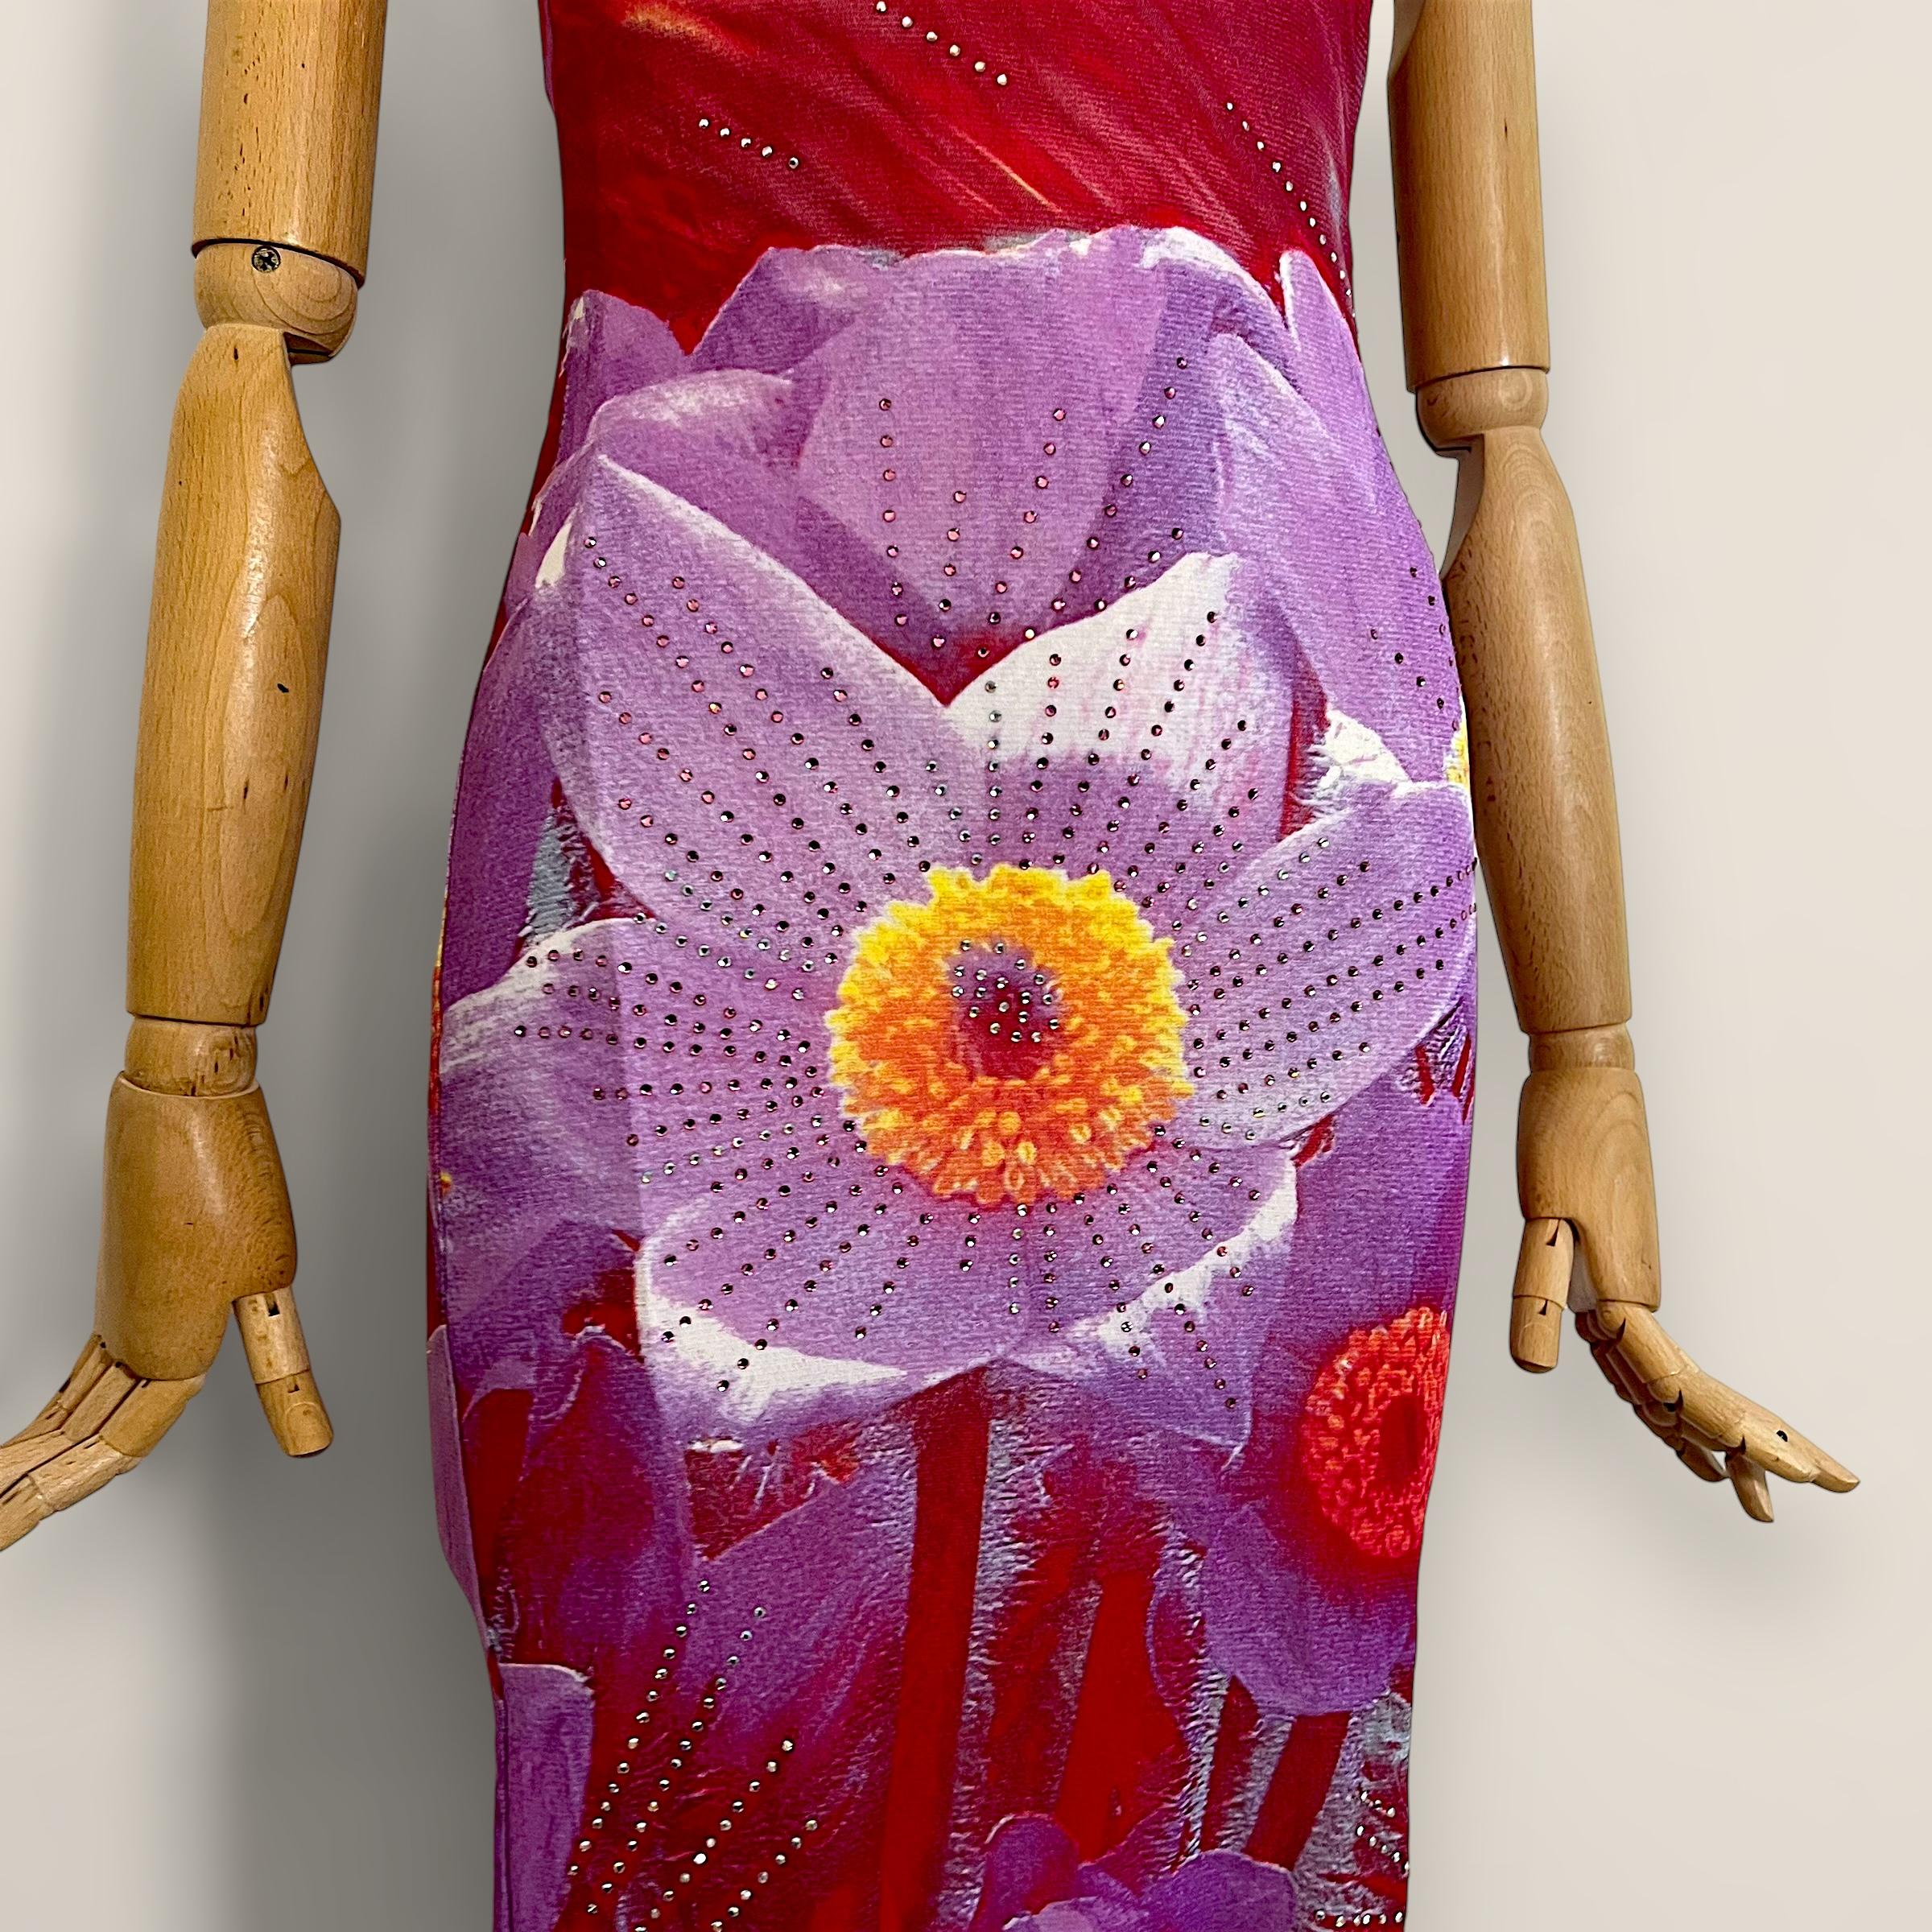 <p>The Roberto Cavalli dress from the Spring/Summer 2000 collection features a striking design. It's crafted from a bold red mesh material, adorned with a large purple floral print that's enhanced by sparkling crystals scattered throughout. The